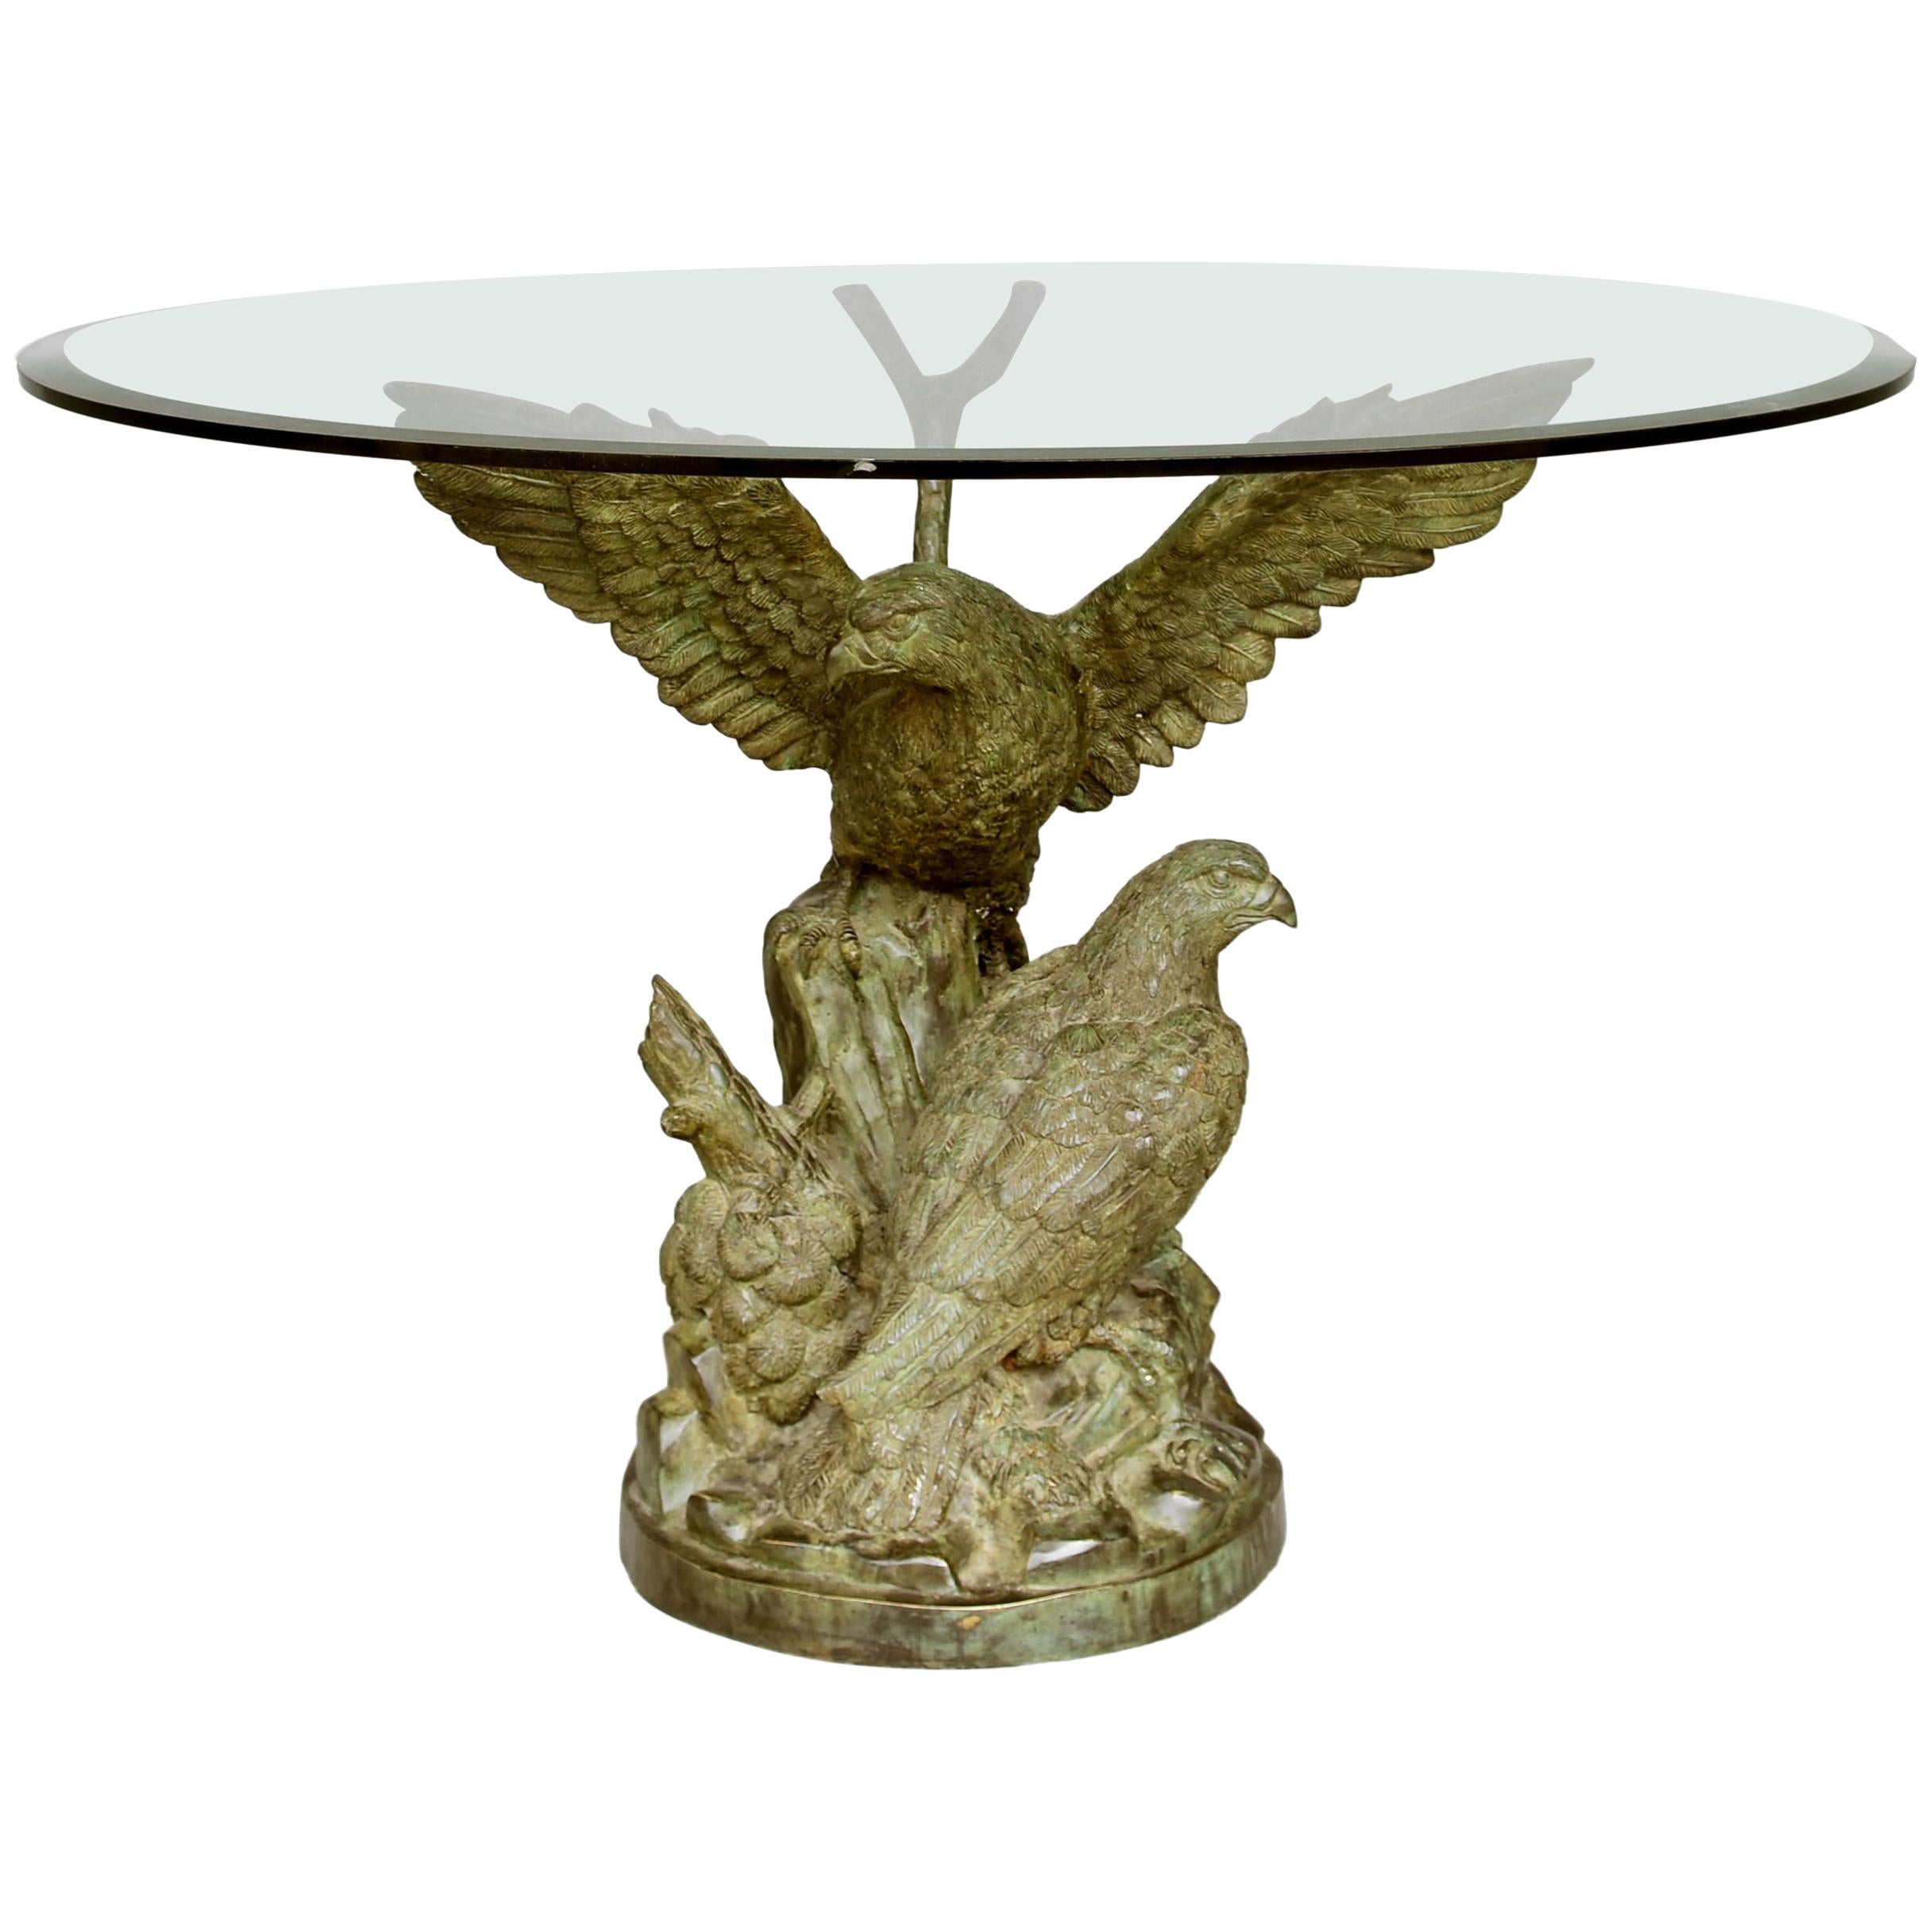 Middle Table with Bronze Eagles with Green Patina